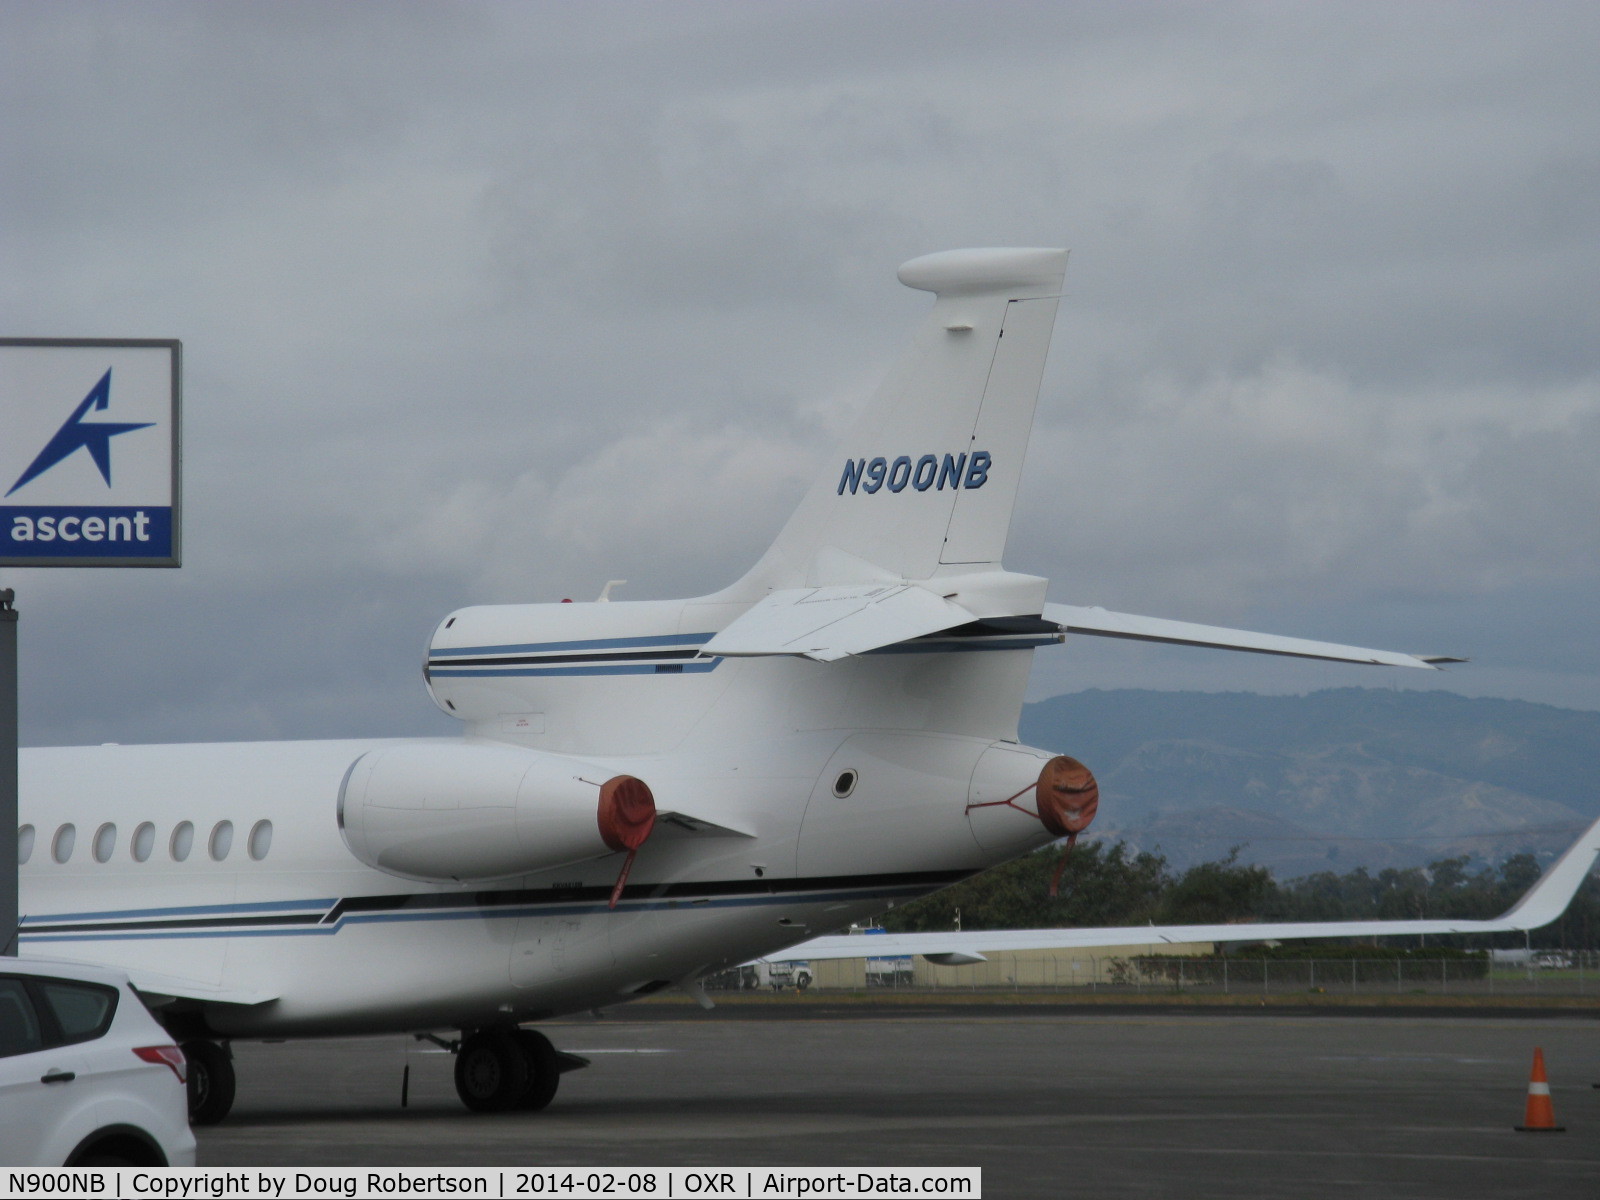 N900NB, 2009 Dassault Falcon 7X C/N 74, 2010 Dassault Aviation FALCON 7X, three P&W(C)PW307A Turbofans each flat rated to 6,400 lb st at ISA+17 degree C with FADEC. Vmo 370 kts 425 mph, showing the big thrust end.